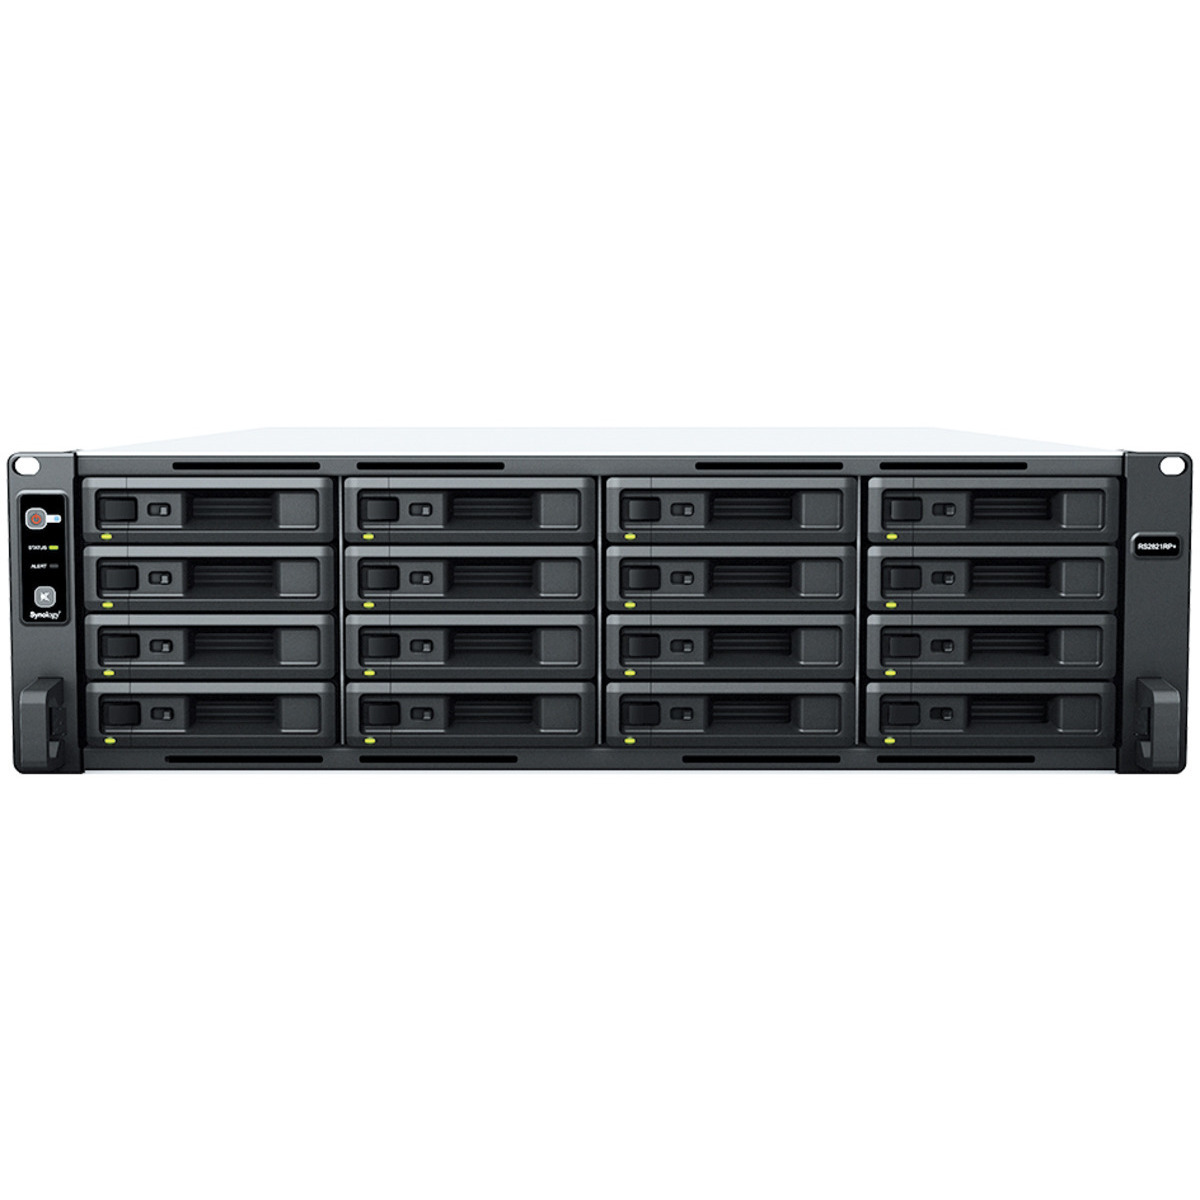 buy $8056 Synology RackStation RS2821RP+ 128tb RackMount NAS - Network Attached Storage Device 16x8000gb Western Digital Ultrastar DC HC320 HUS728T8TALE6L4 3.5 7200rpm SATA 6Gb/s HDD ENTERPRISE Class Drives Installed - Burn-In Tested - nas headquarters buy network attached storage server device das new raid-5 free shipping usa christmas new year holiday sale RackStation RS2821RP+